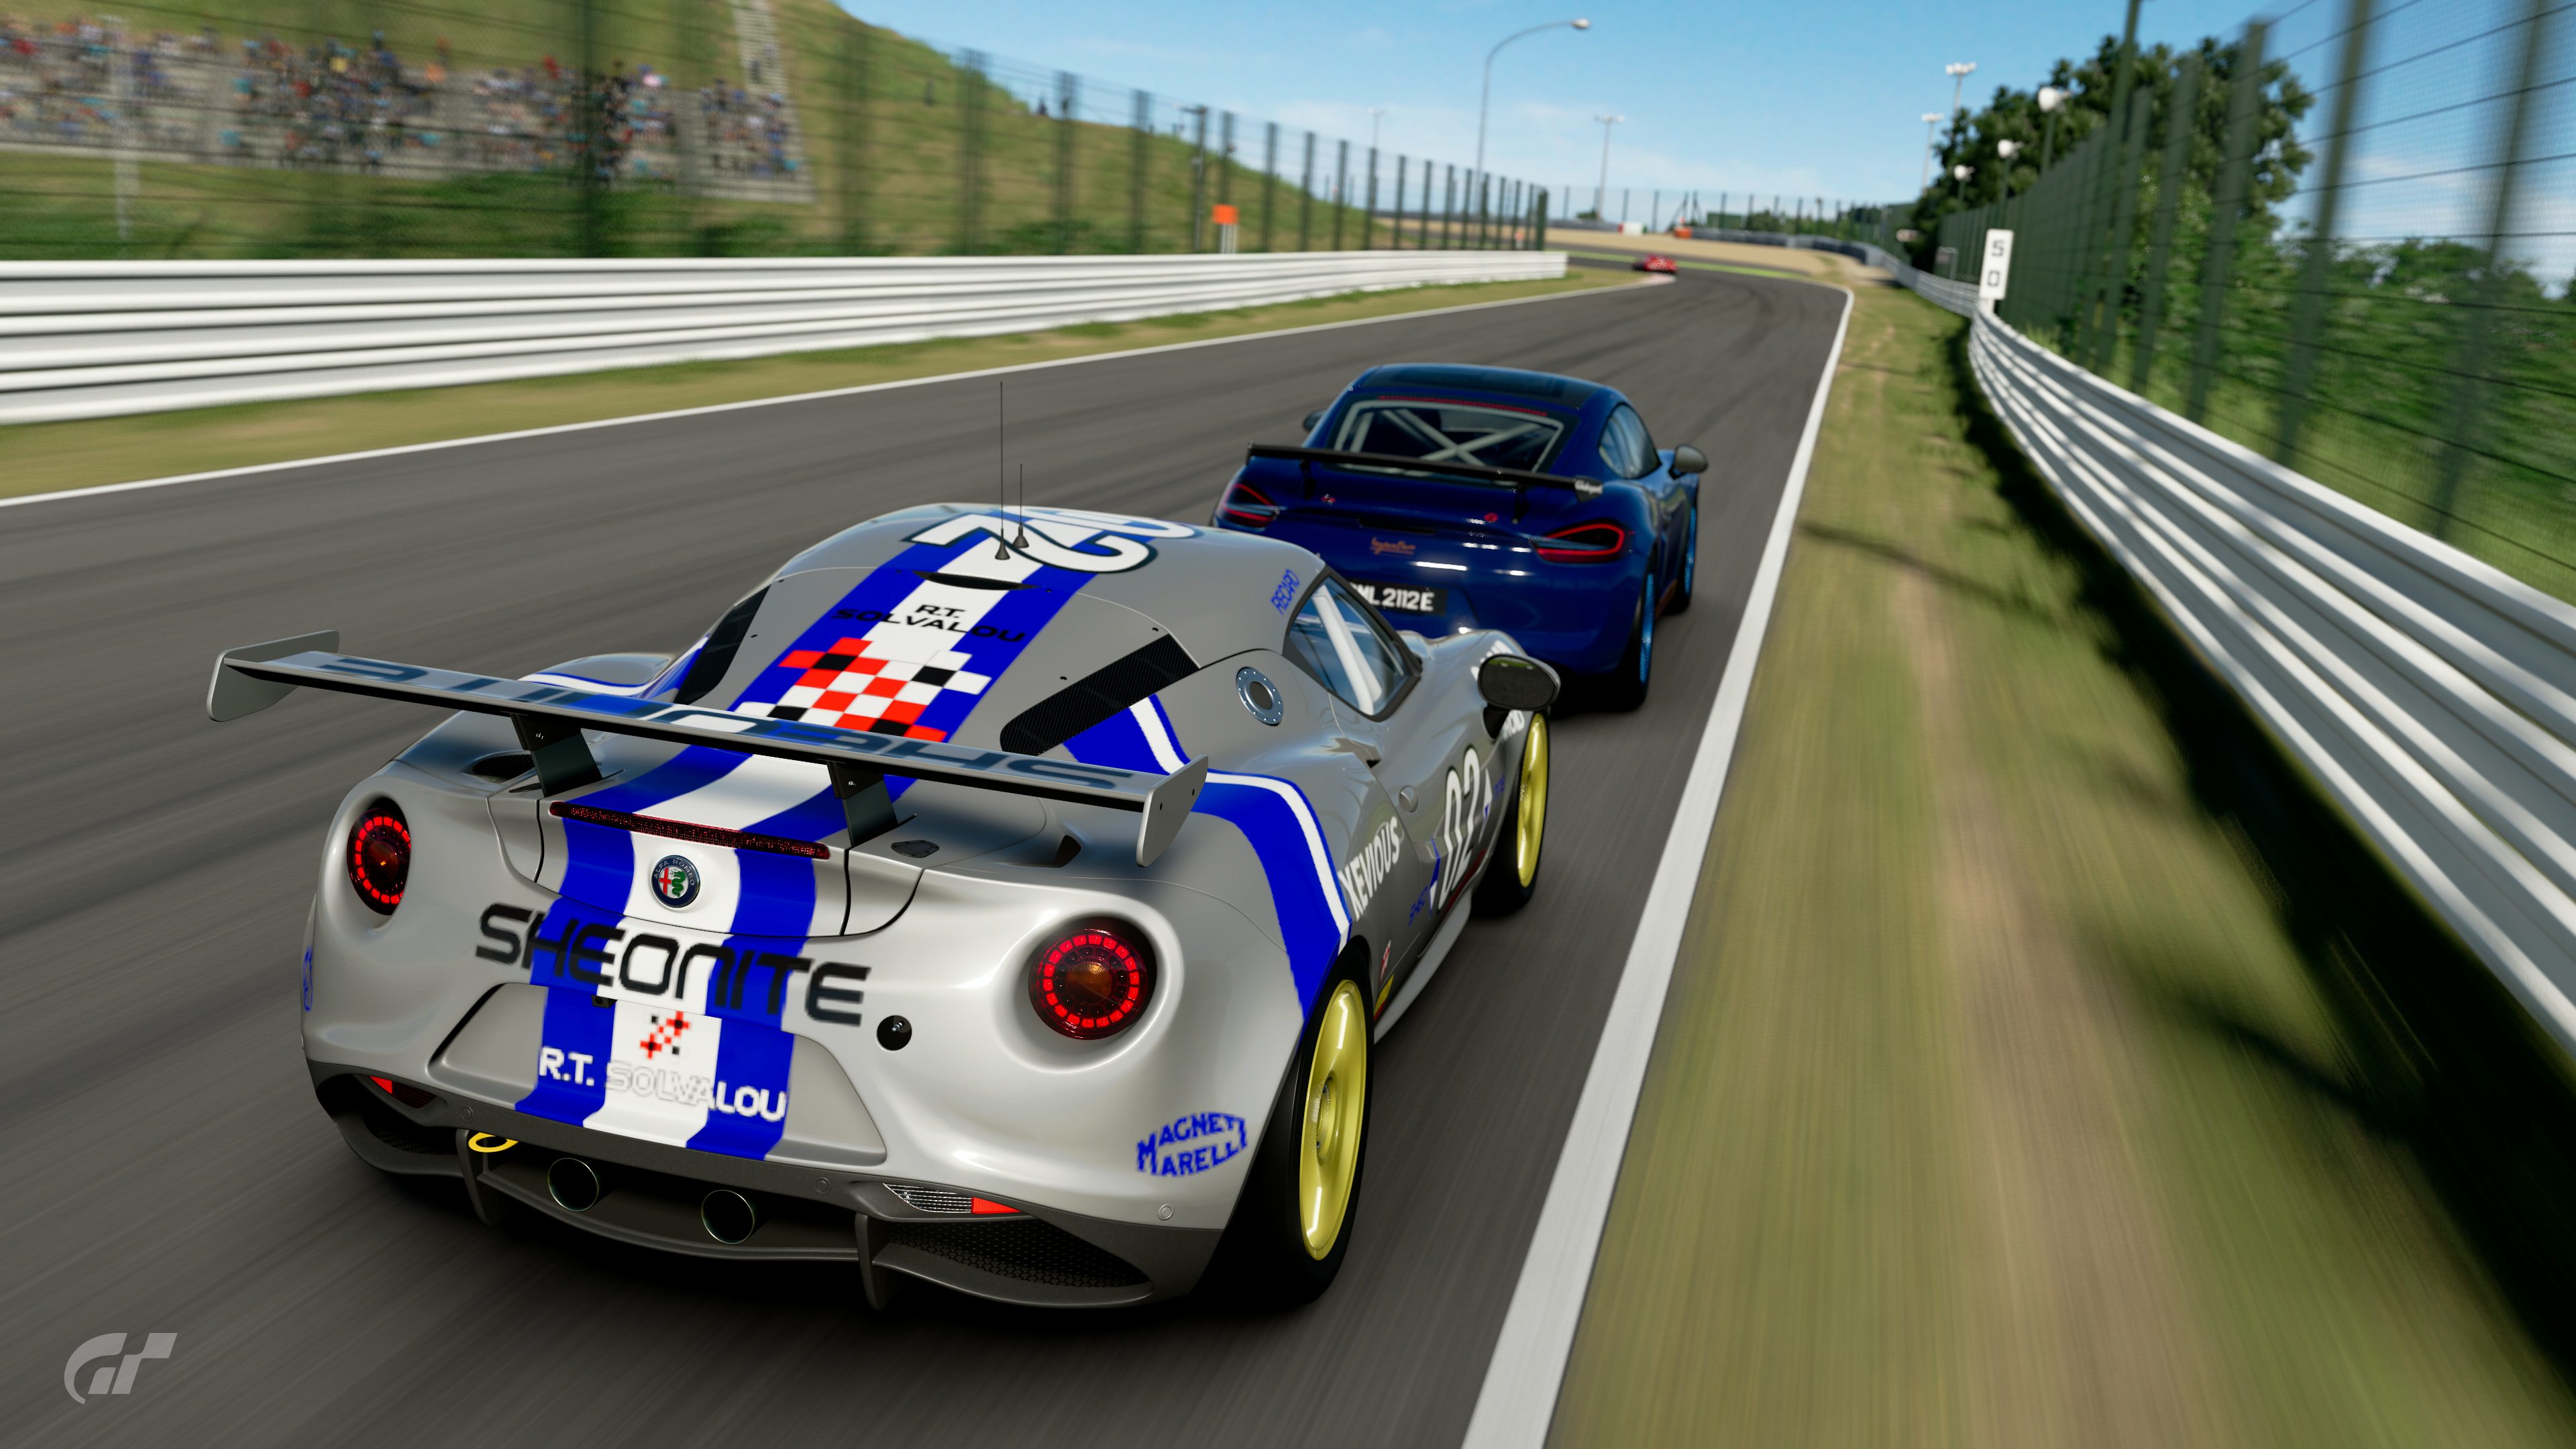 Gran Turismo 7 Reignites Racing Excellence on PS5